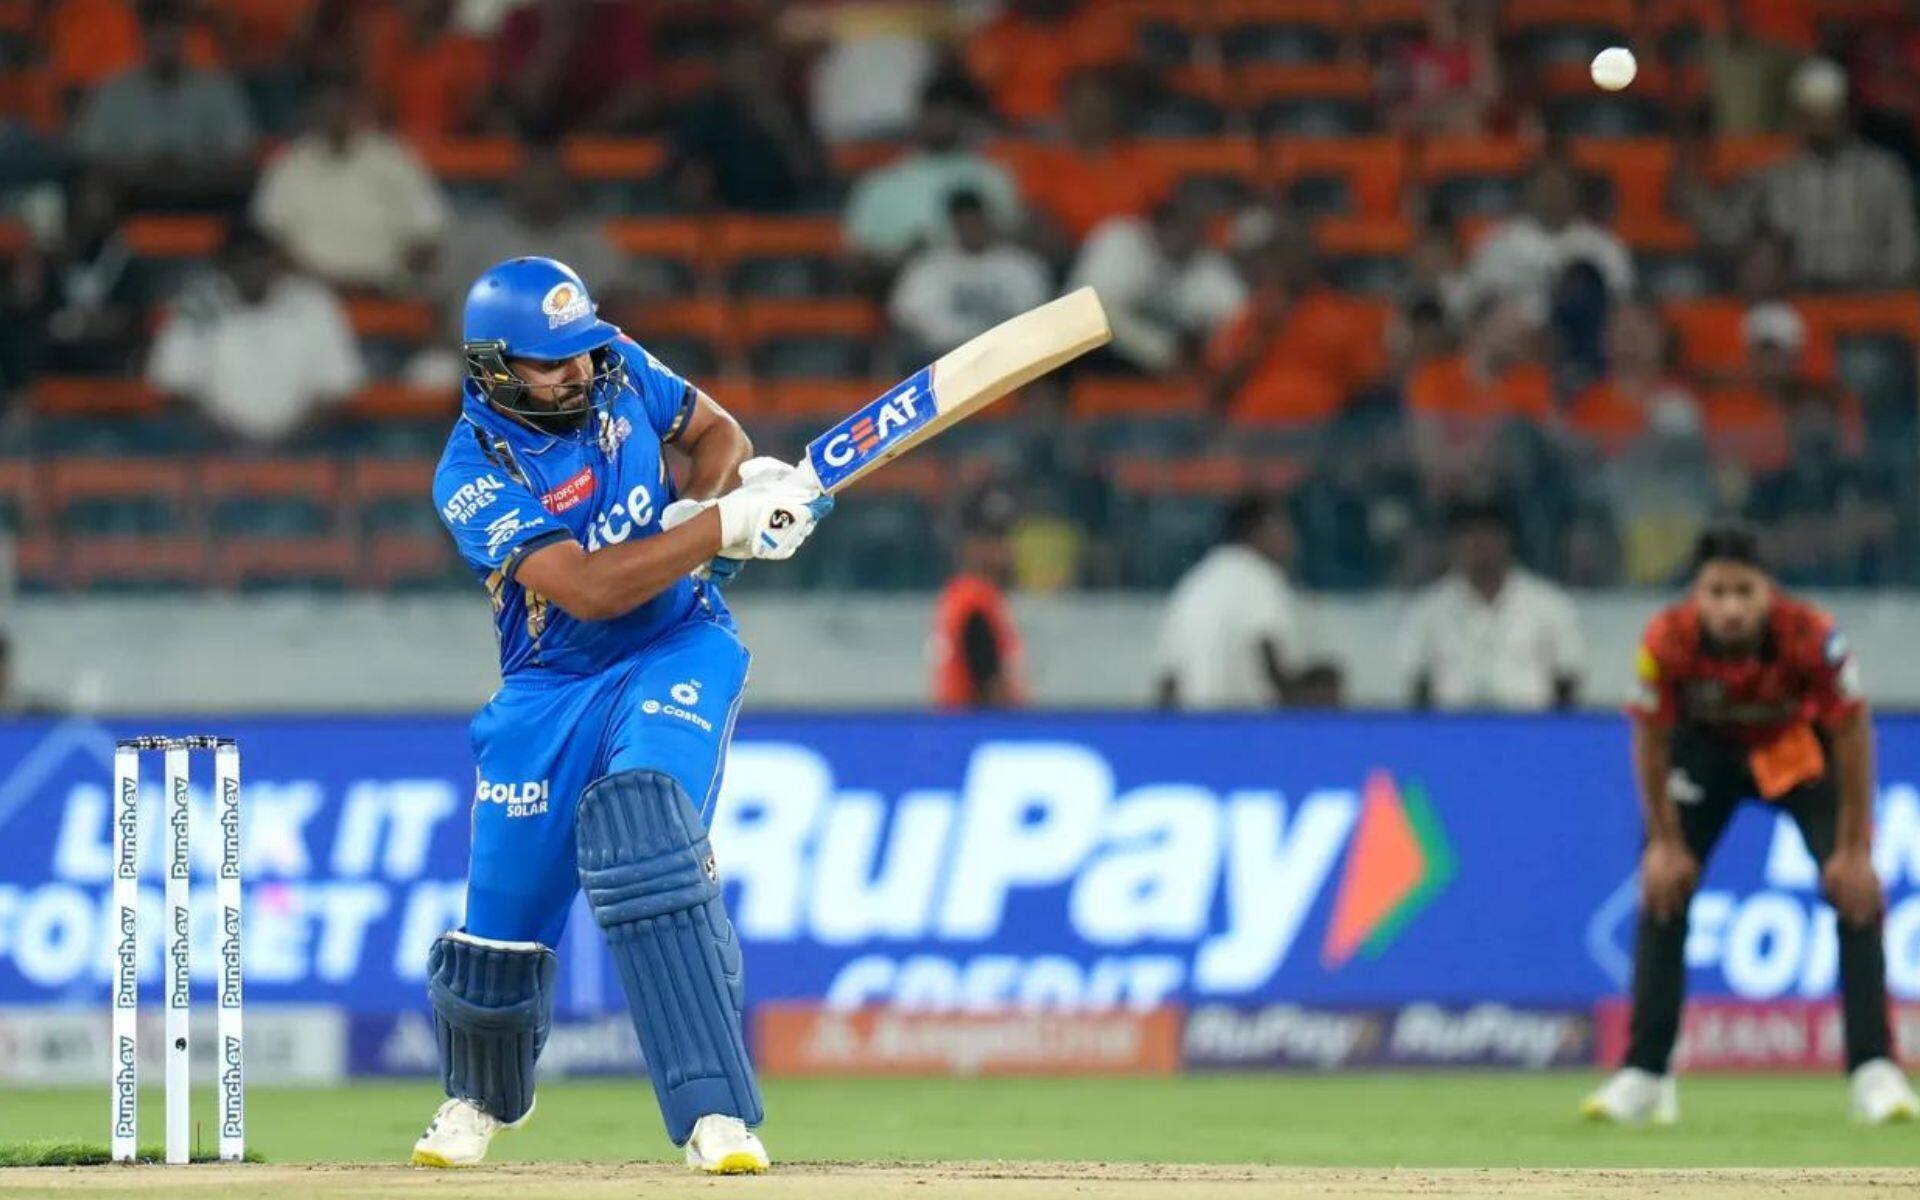 Rohit Sharma will be an important C/Vc choice for the fantasy contests of the match [iplt20.com]